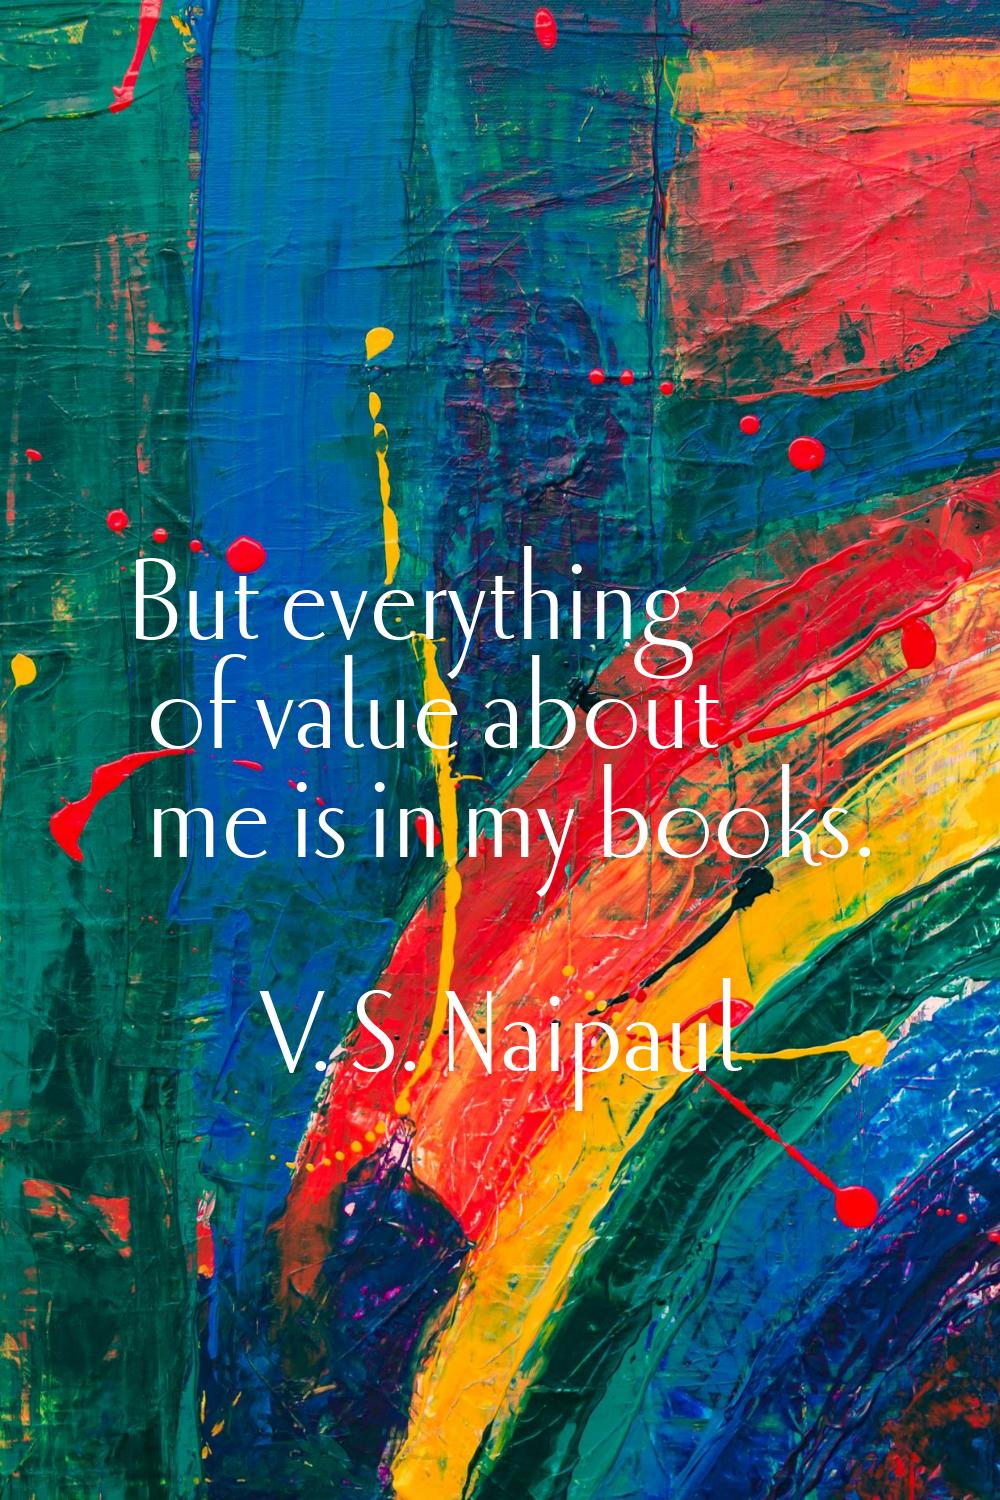 But everything of value about me is in my books.